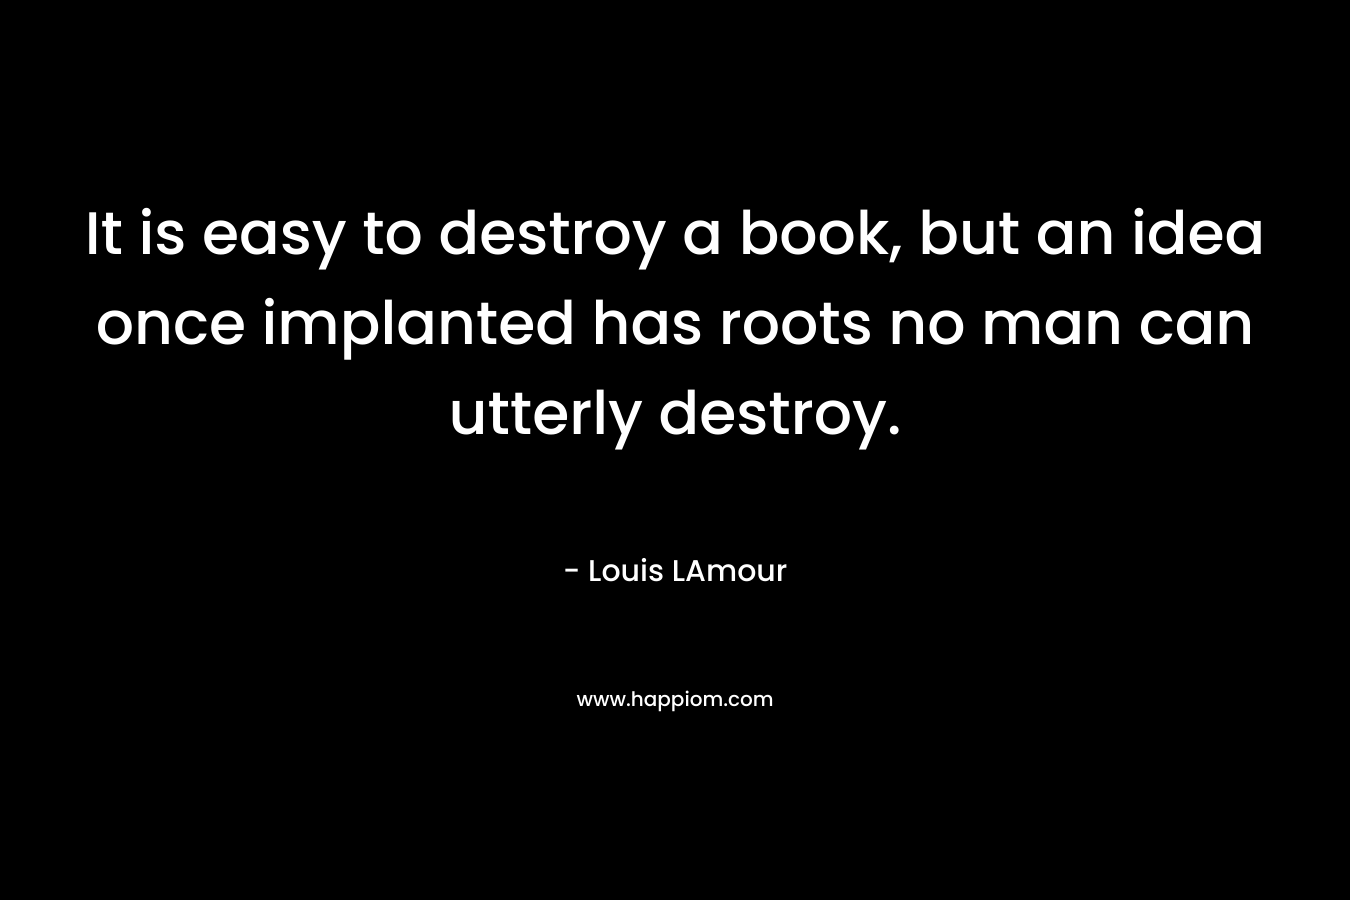 It is easy to destroy a book, but an idea once implanted has roots no man can utterly destroy.